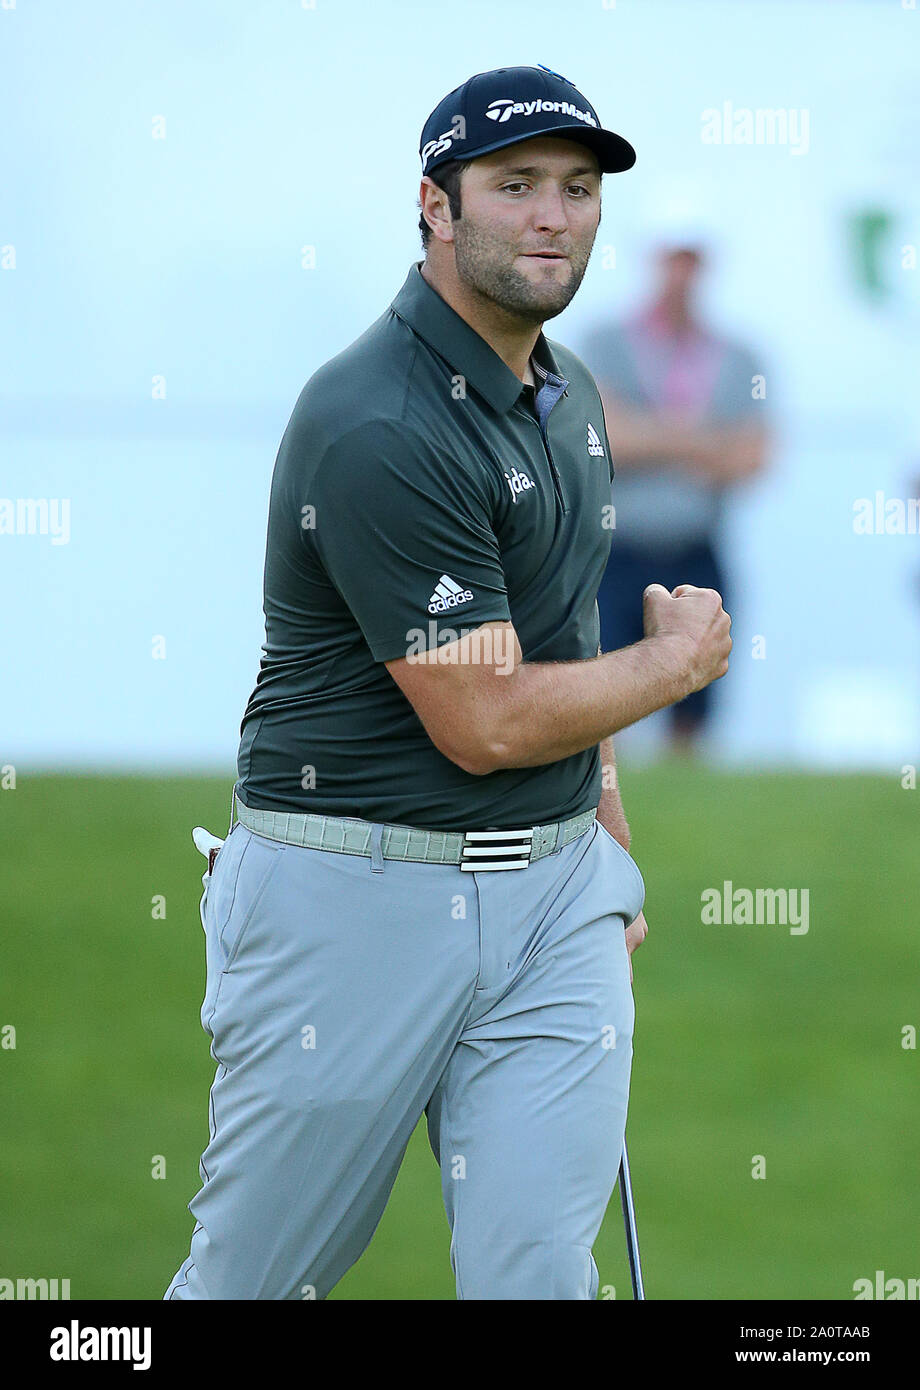 Wentworth Golf Club, Virginia Water, UK. 21 September 2019. Jon Rahm of Spain celebrates after his putt on the 18th hole during Day 3 at the BMW PGA Championship. Editorial use only. Credit: Paul Terry/Alamy. Credit: Paul Terry Photo/Alamy Live News Stock Photo